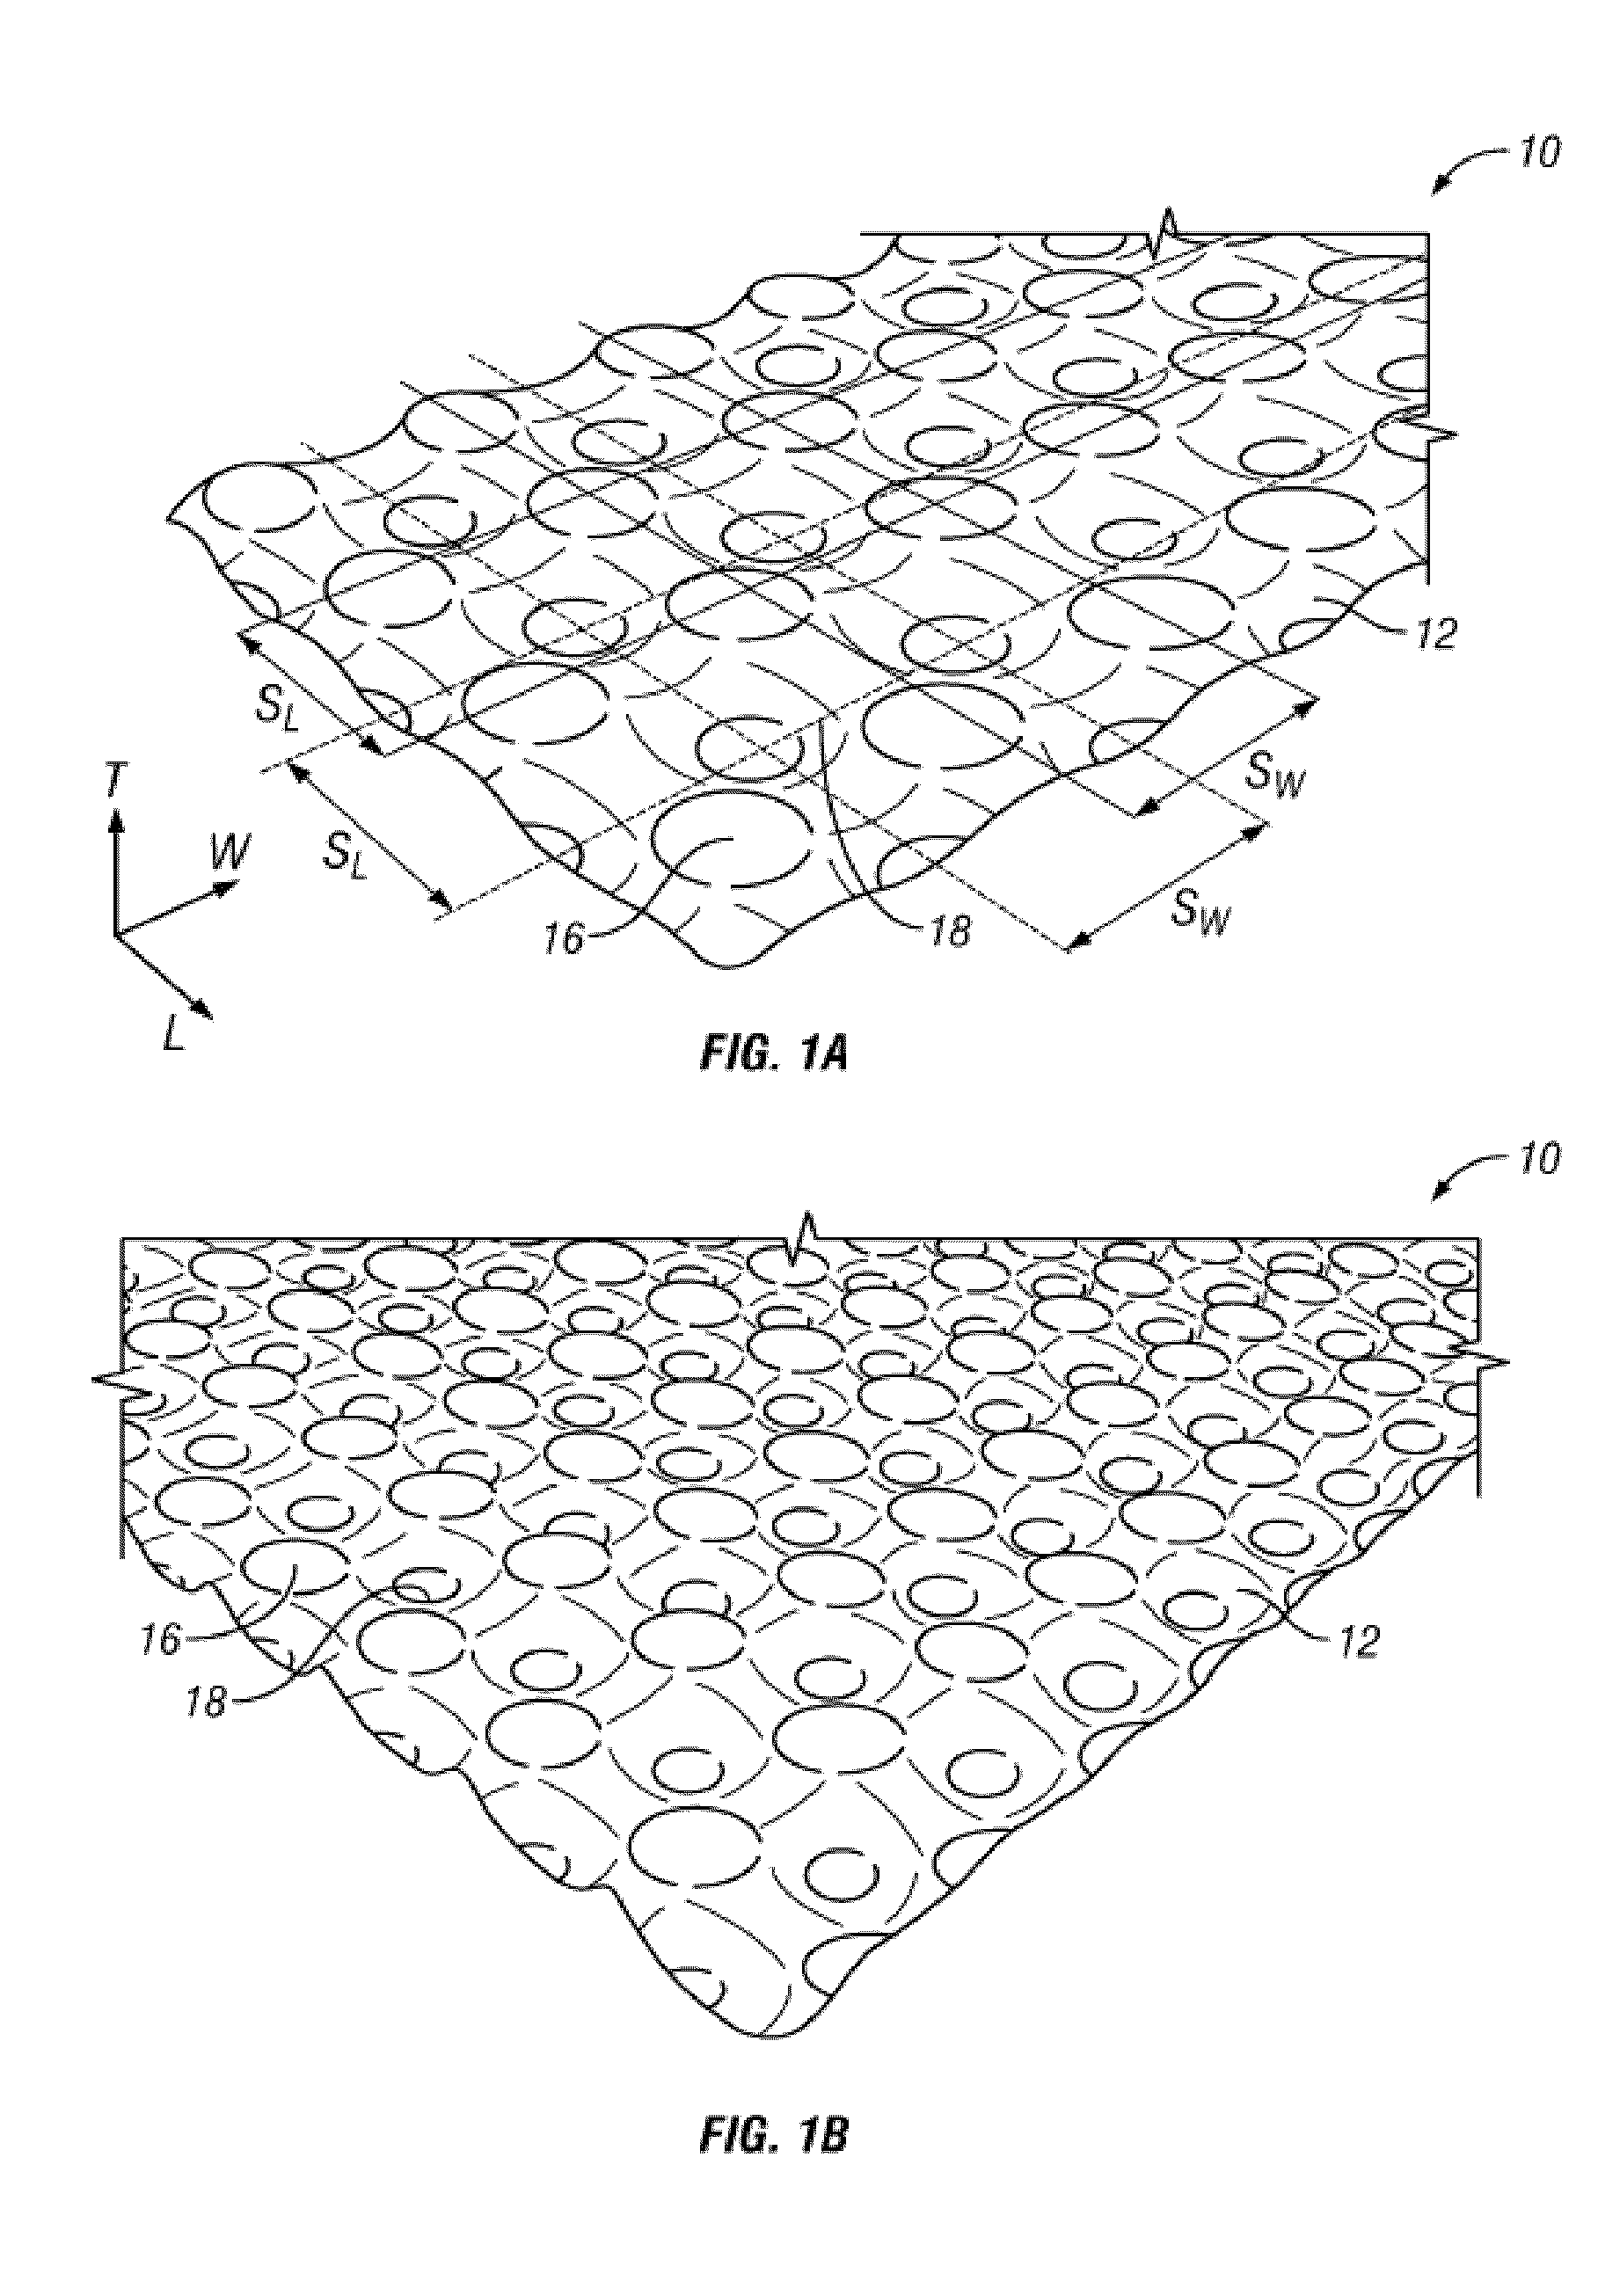 Optimal sandwich core structures and forming tools for the mass production of sandwich structures